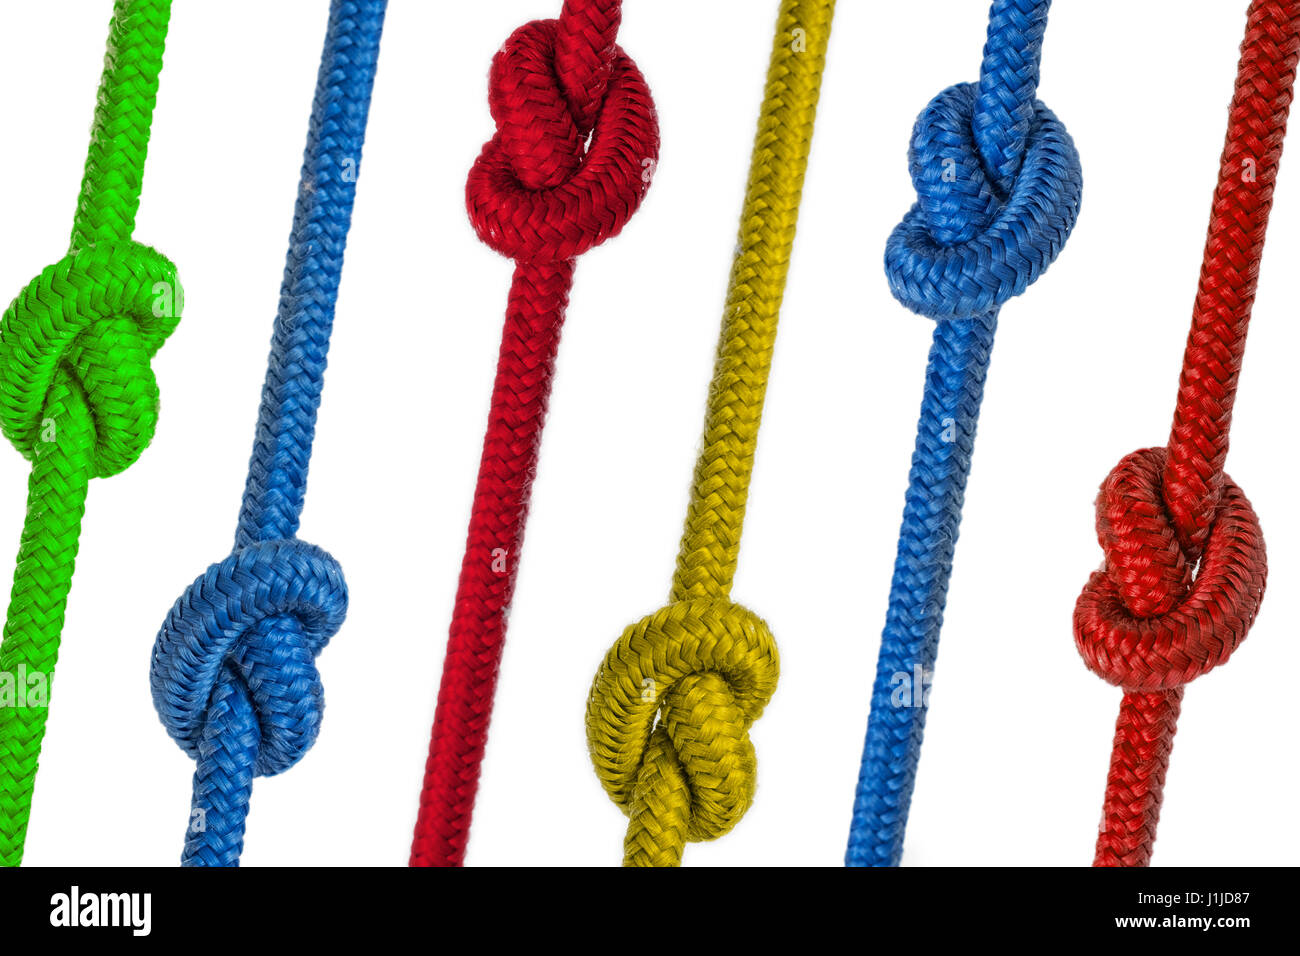 colored knotted ropes - ropes with knots colorized Stock Photo